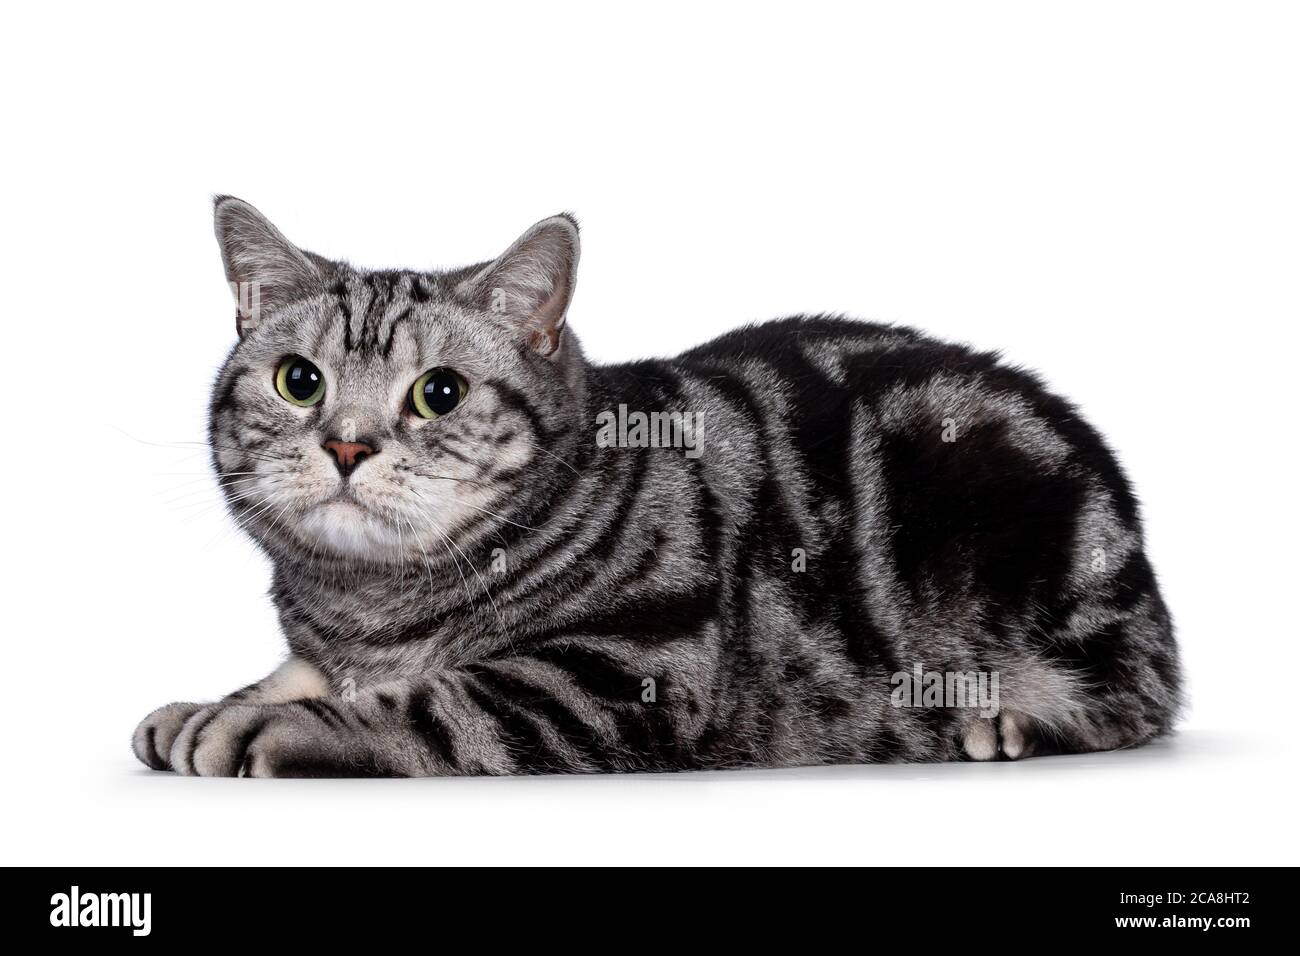 Handsome silver tabby blotched British Shorthair adult male cat. Laying down side ways, looking towards camera with green eyes. Isolated on white back Stock Photo